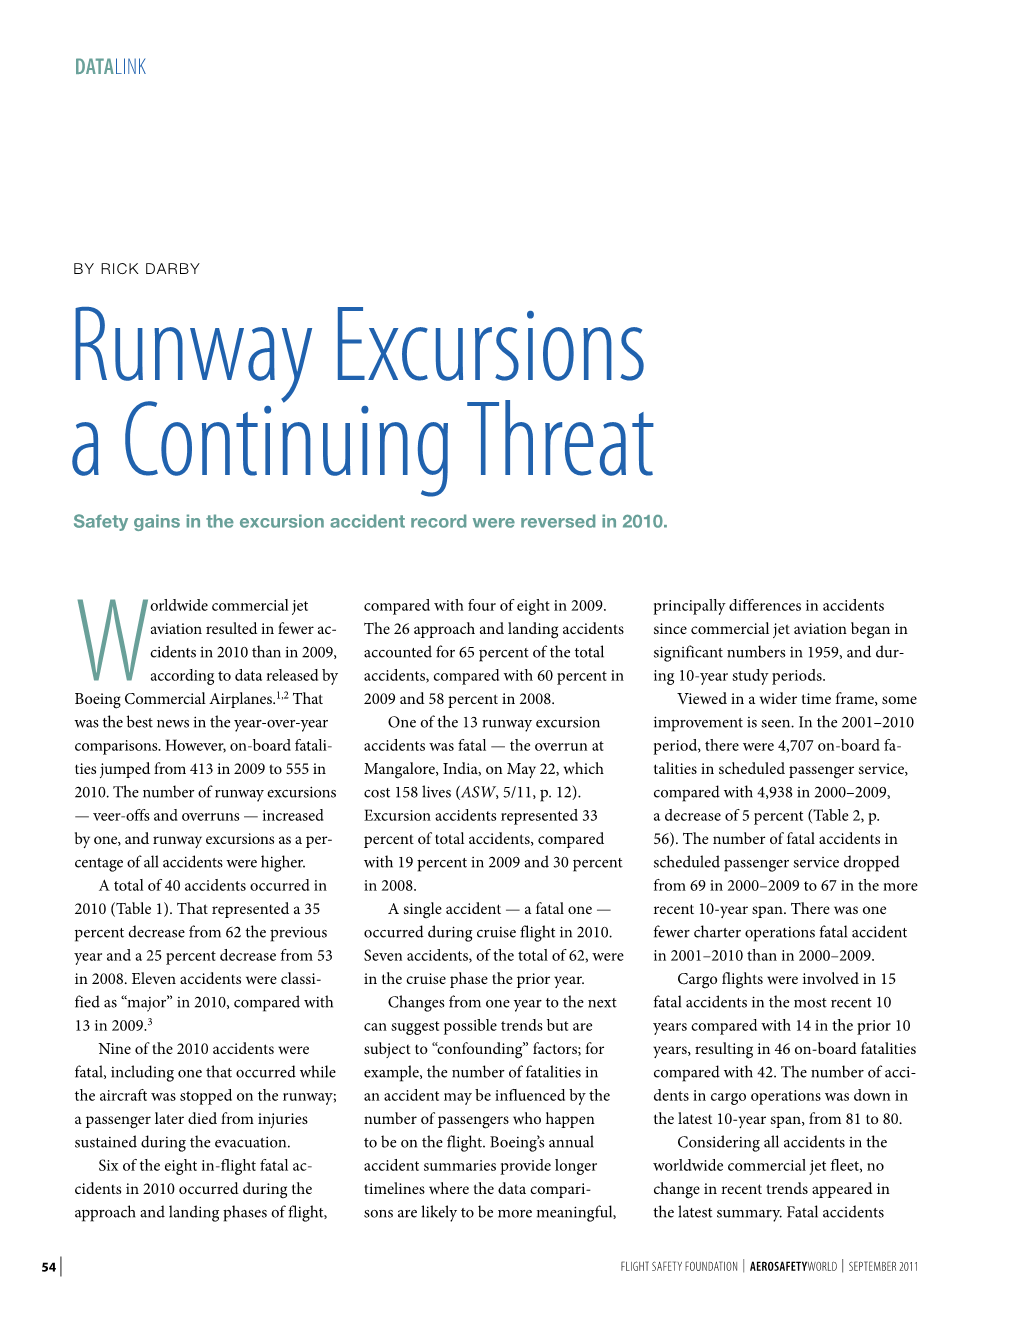 Runway Excursions a Continuing Threat Safety Gains in the Excursion Accident Record Were Reversed in 2010